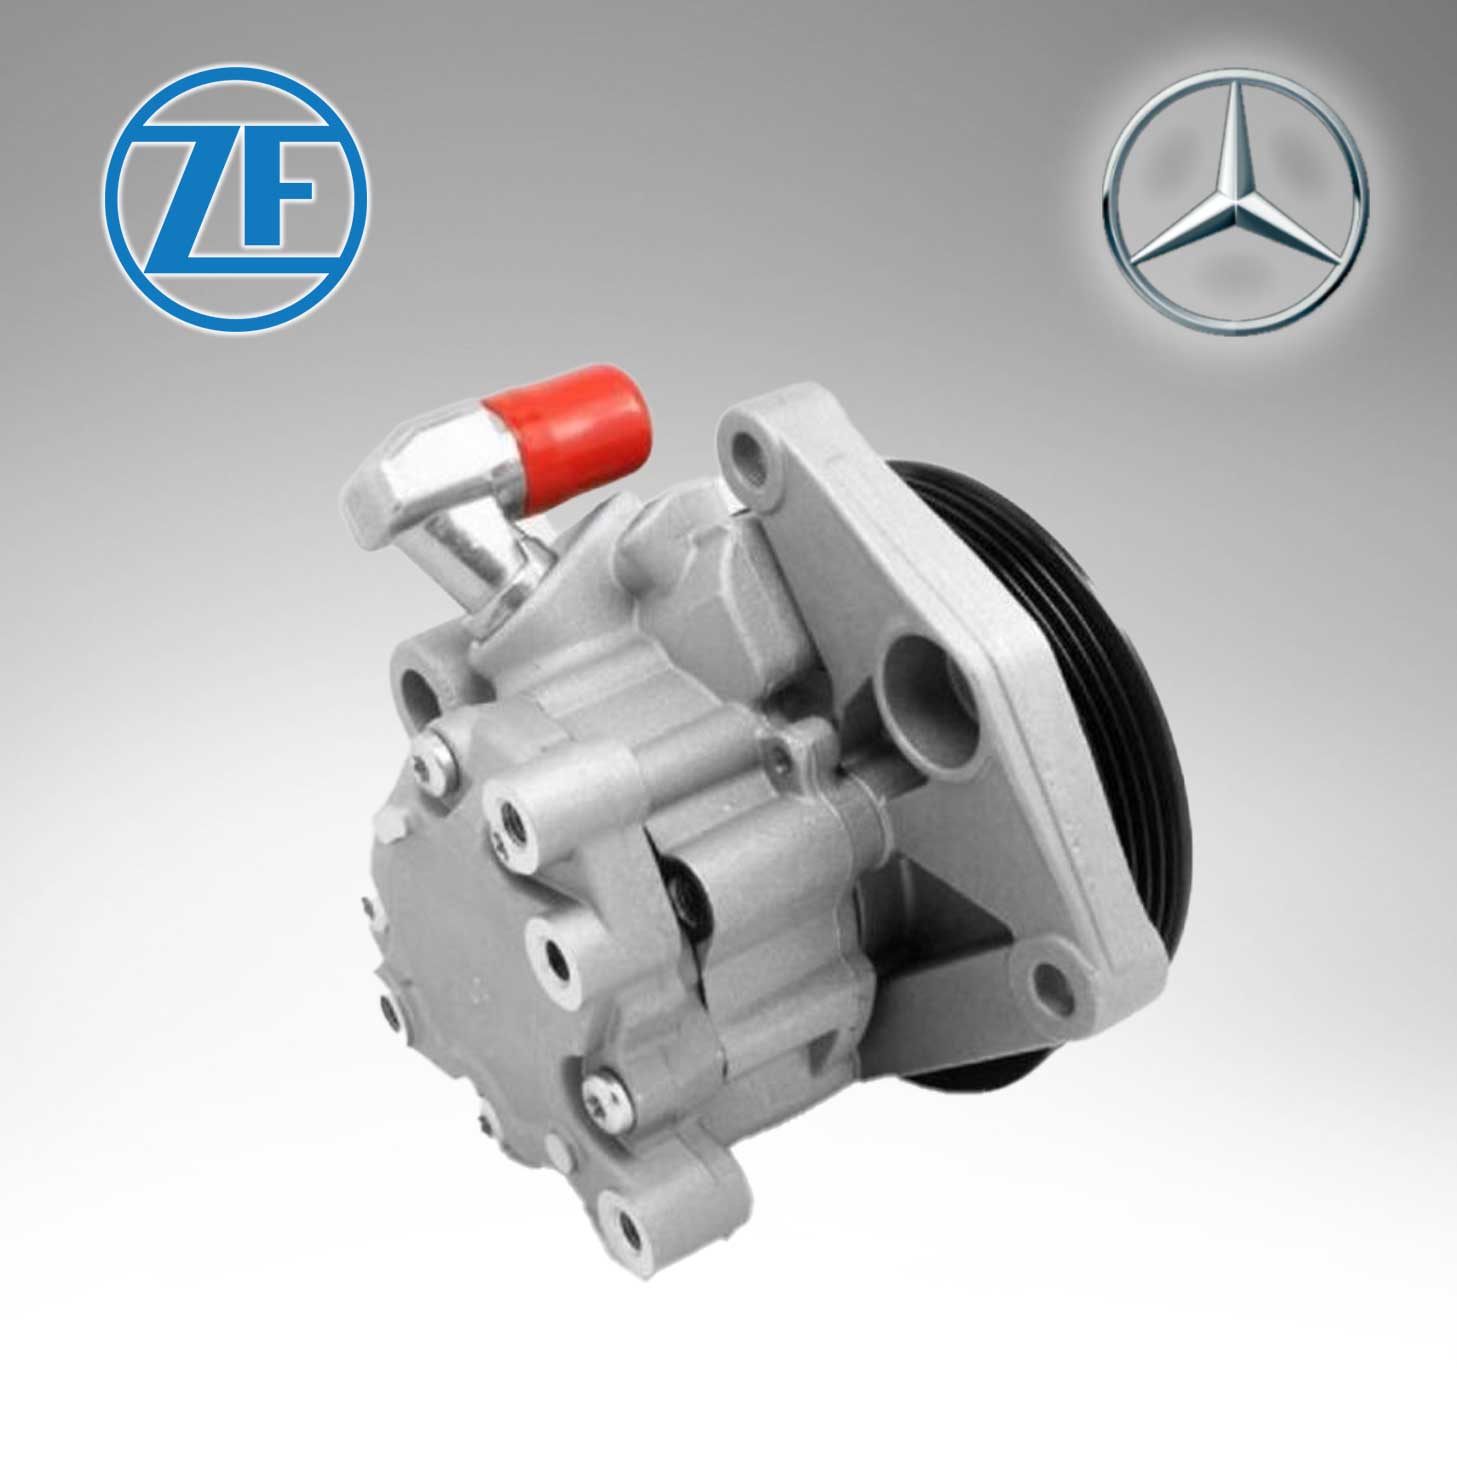 ZF POWER STEERING PUMP For Mercedes Benz 0064663301